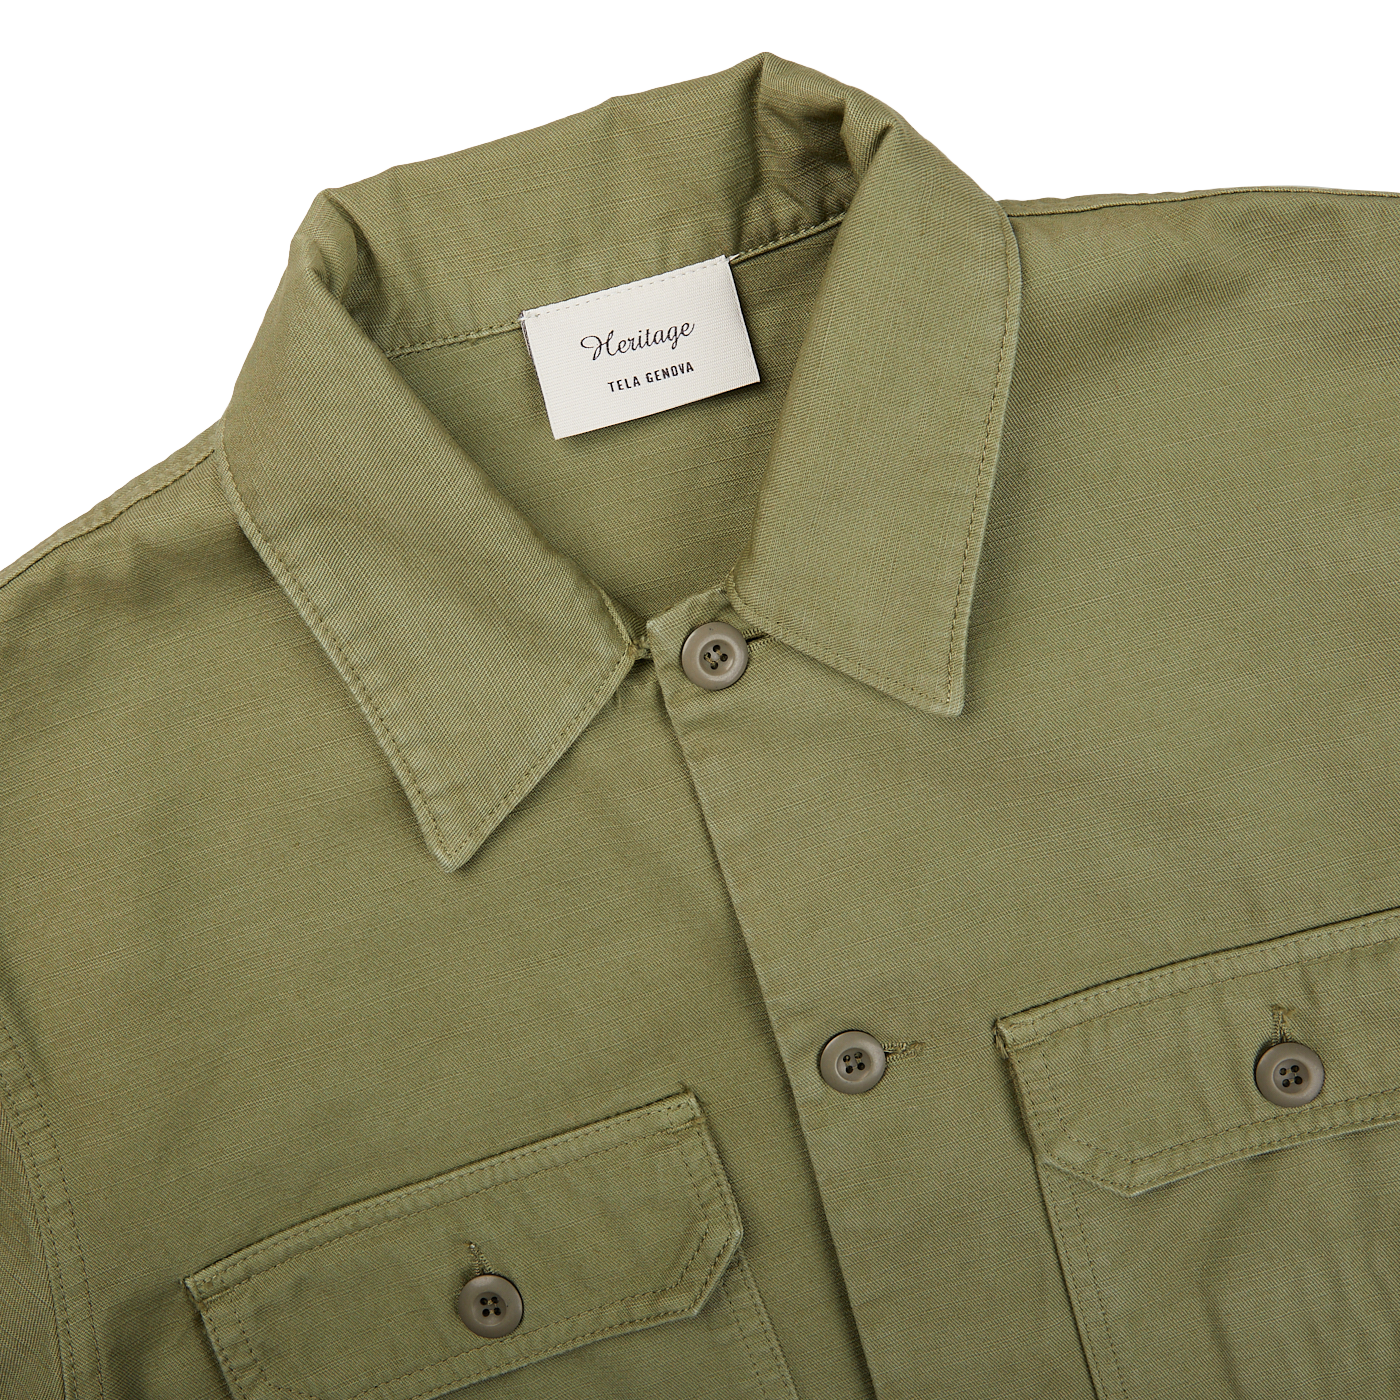 The Grass Green Greto Cotton Overshirt in olive green by Tela Genova.